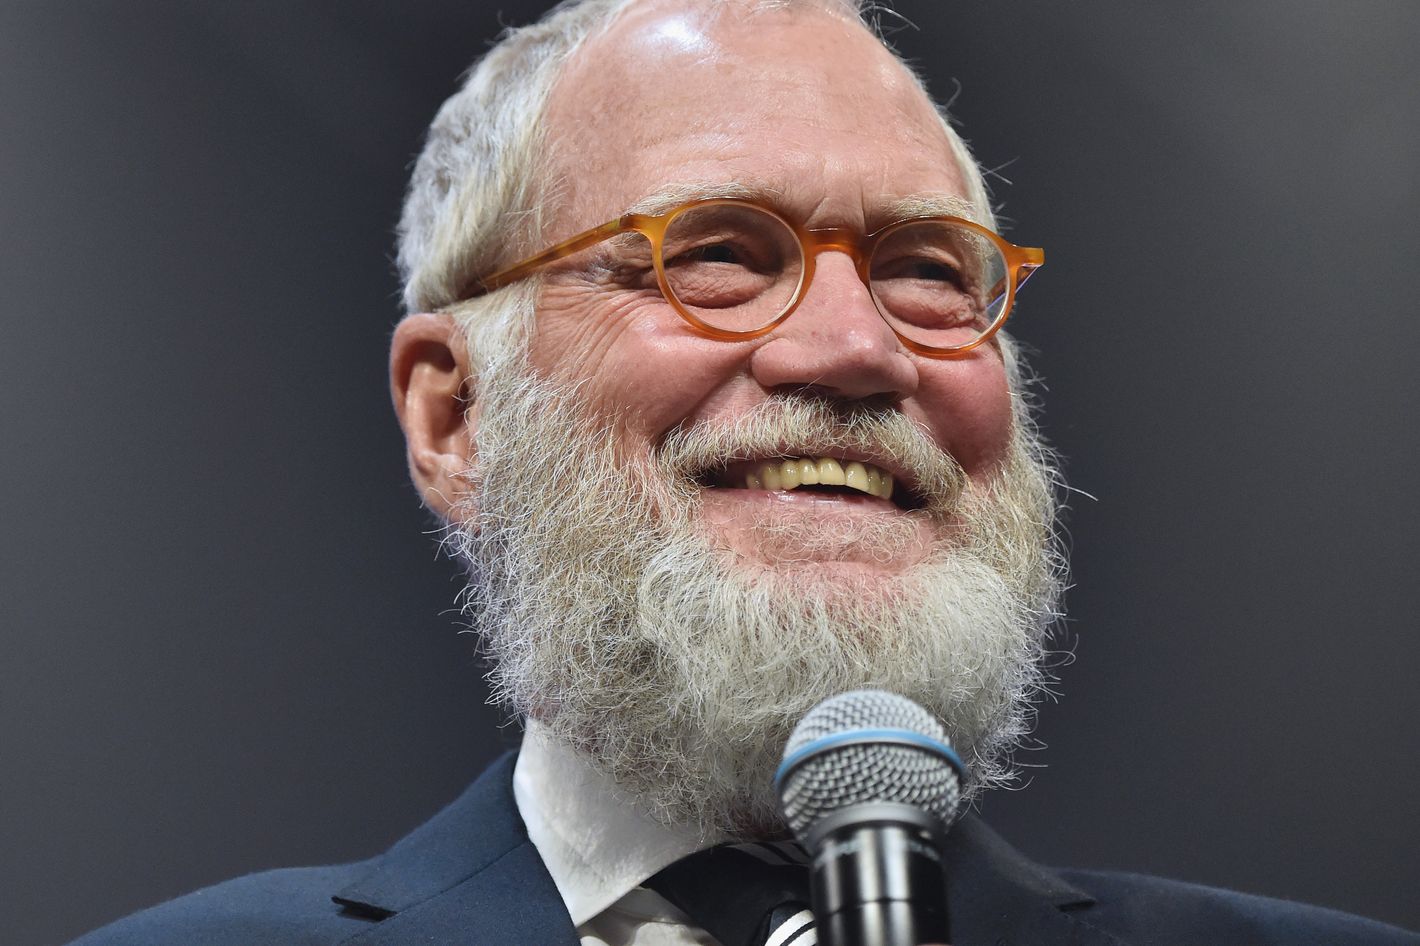 Did David Letterman Retire to Santa? Beard Suggests ‘You Better